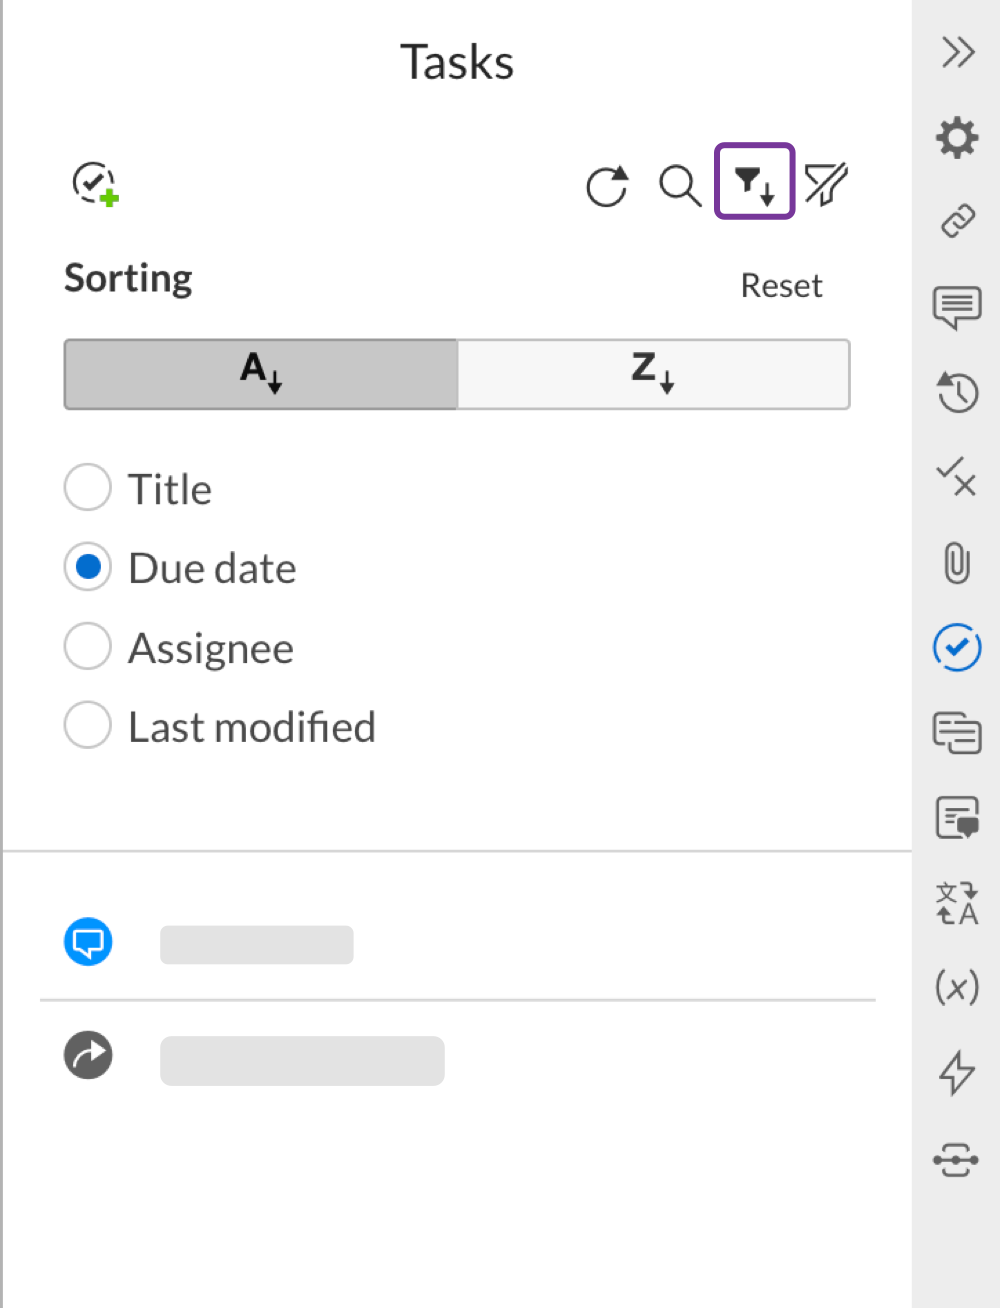 Click the Sort icon to organize how your tasks are displayed